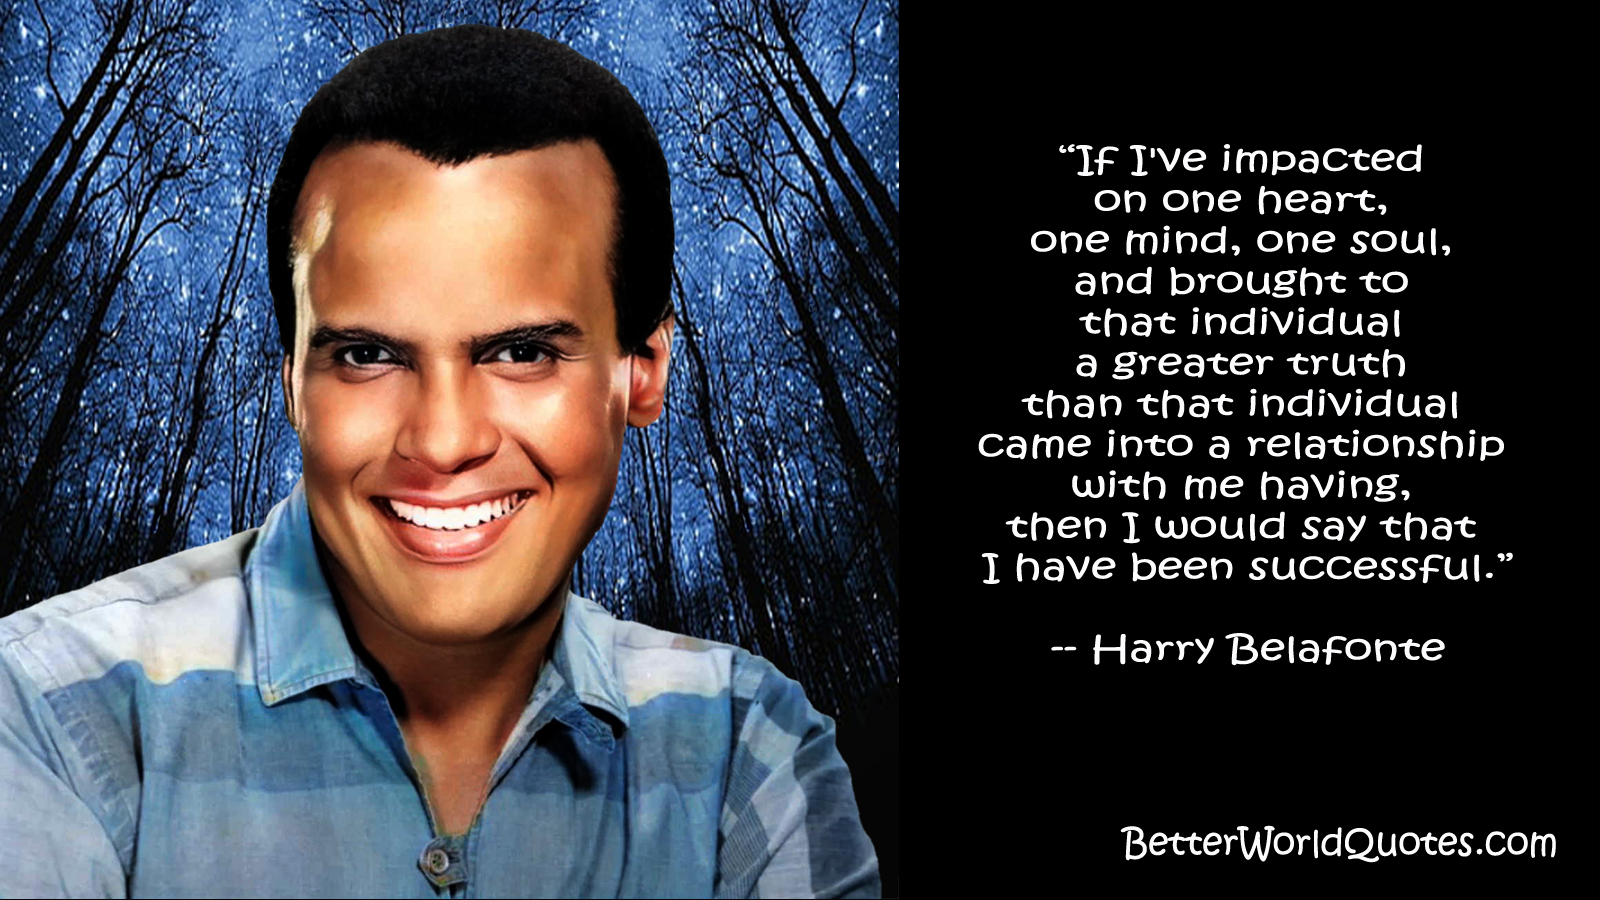 Harry Belafonte: If I've impacted on one heart, one mind, one soul, and brought to that individual a greater truth than that individual came into a relationship with me having, then I would say that I have been successful.